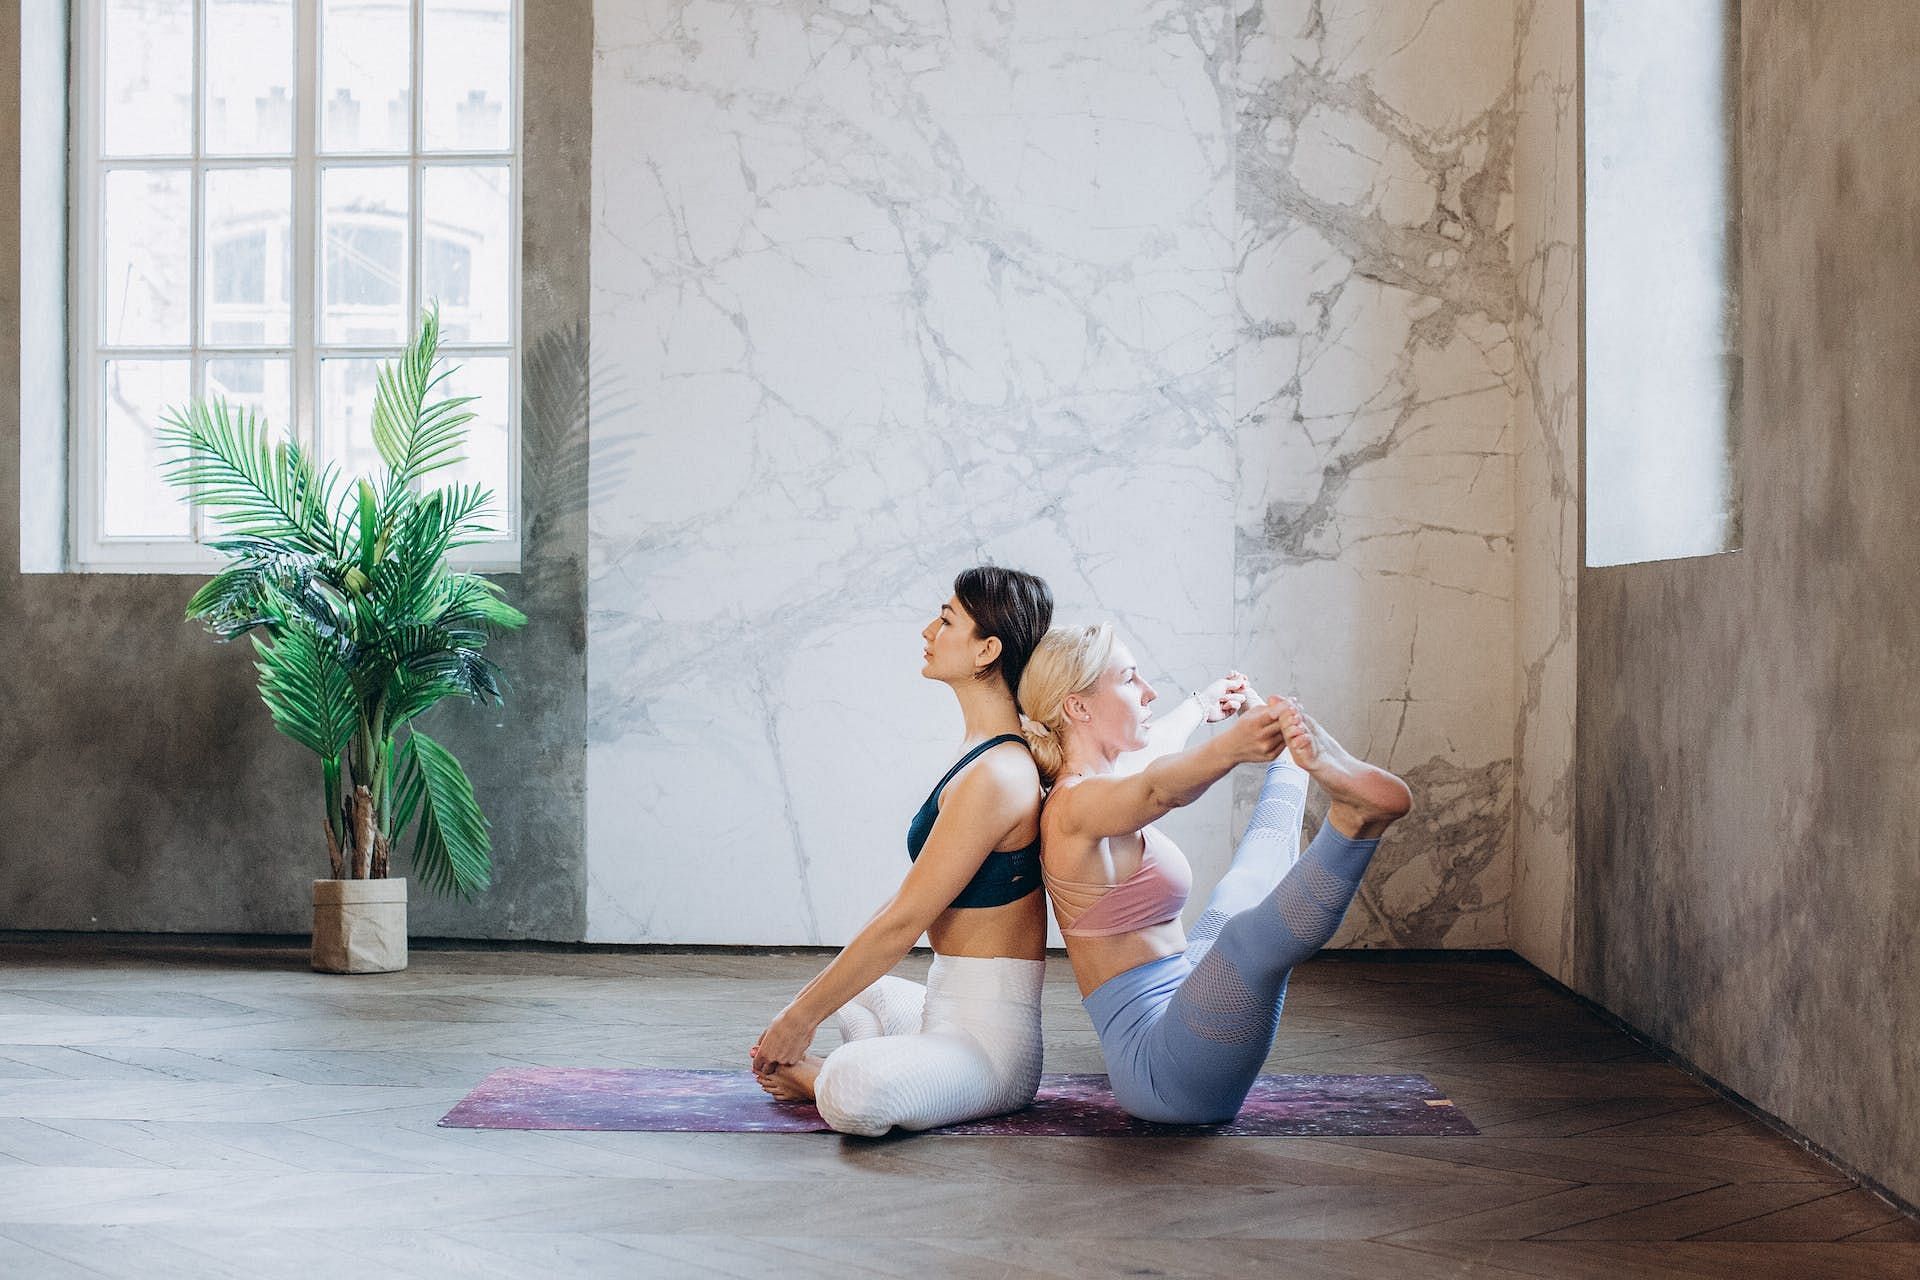 Best yoga poses for runners. (Image credits: Pexels/ Elina Fairytale)